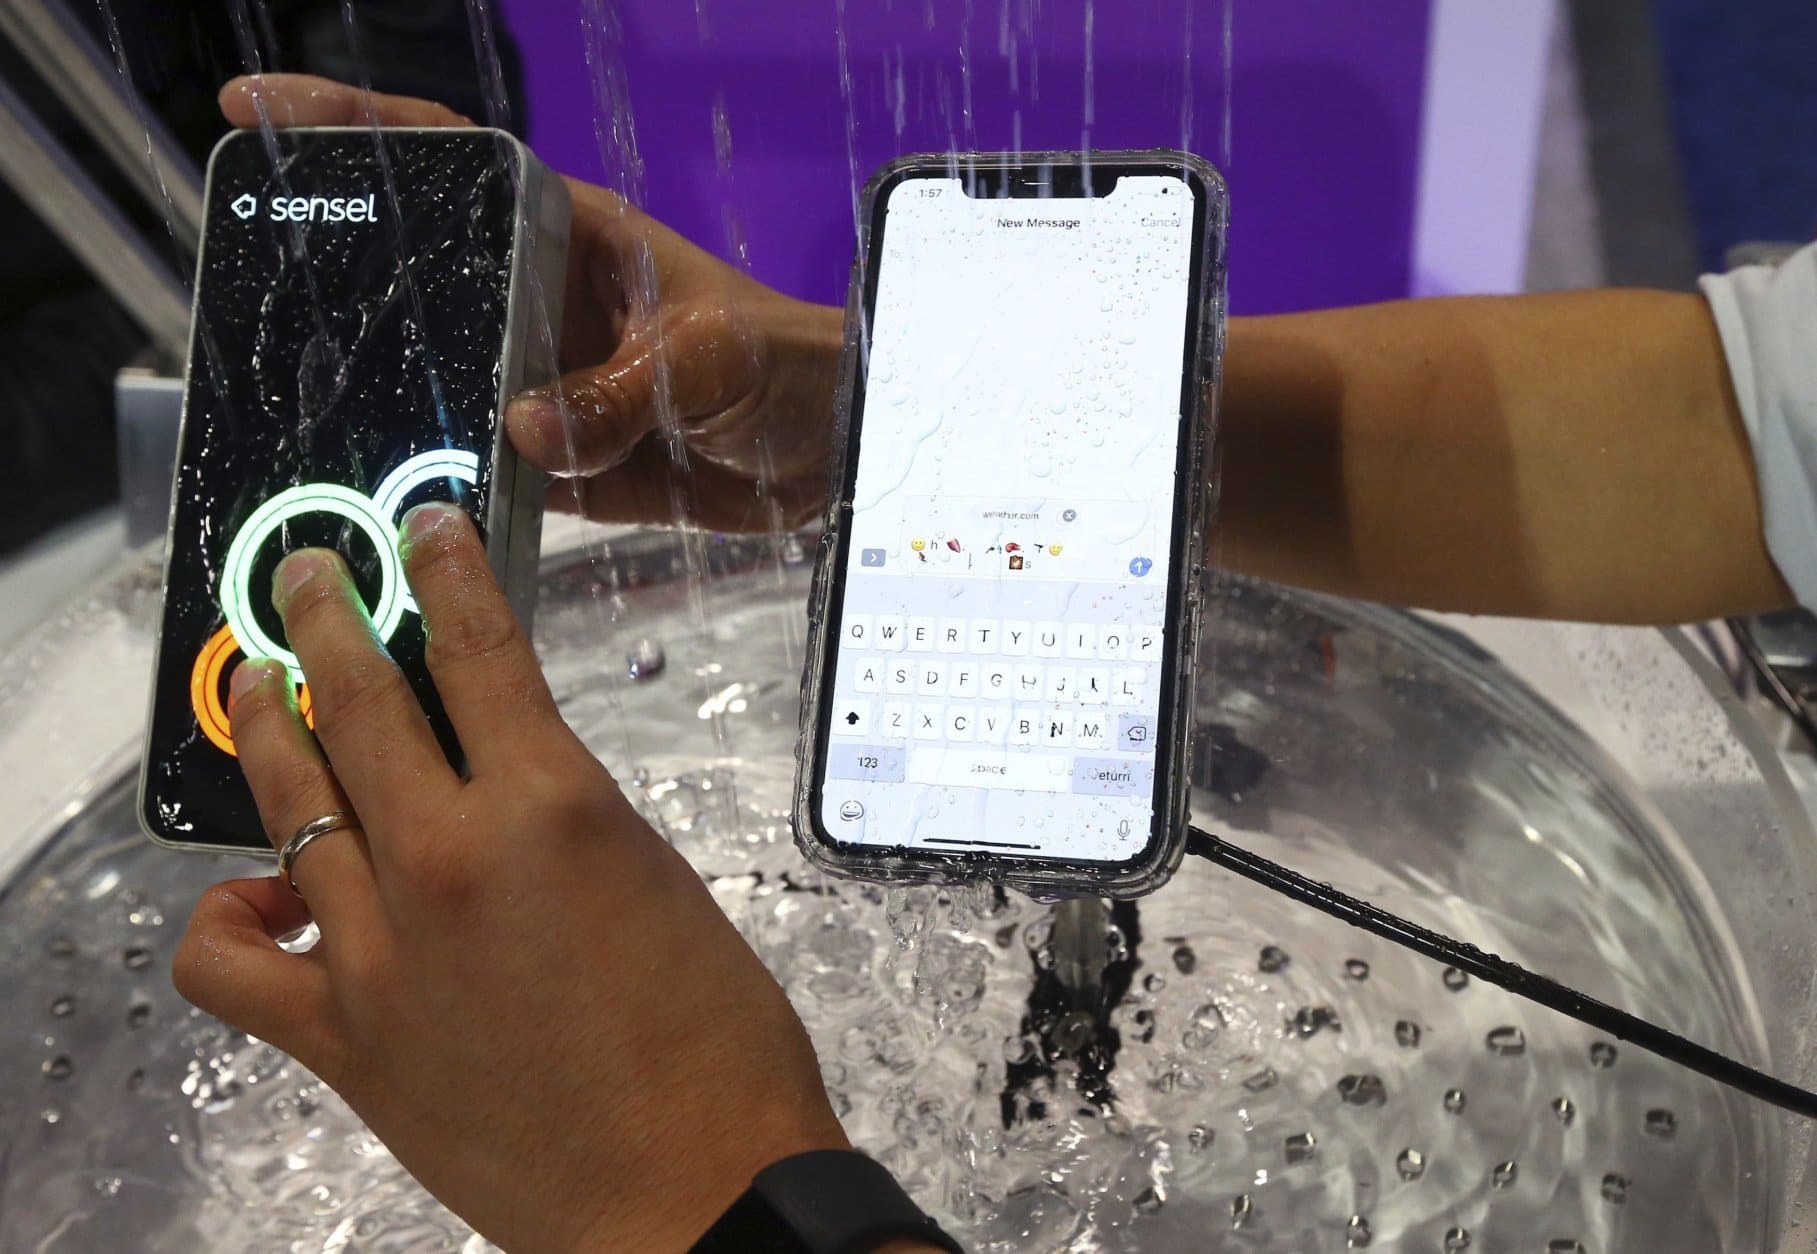 Sensel shows off its latest touch technology running water over a device to demonstrate that it still works, at CES International Wednesday, Jan. 9, 2019, in Las Vegas. (AP Photo/Ross D. Franklin)